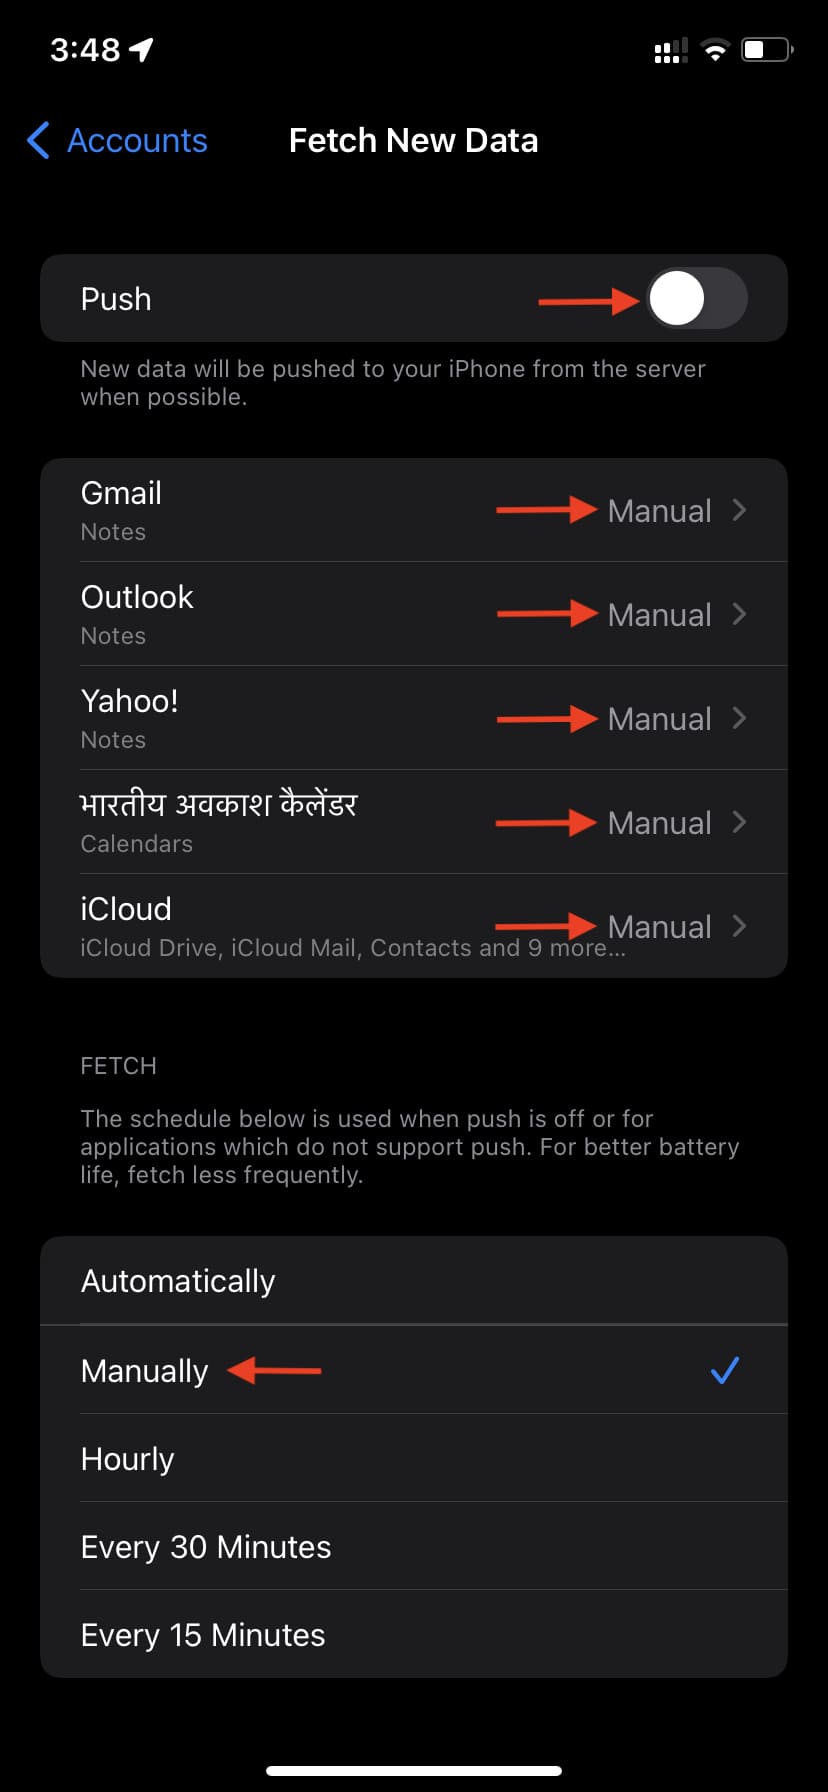 Fetch mail manually to save iPhone battery